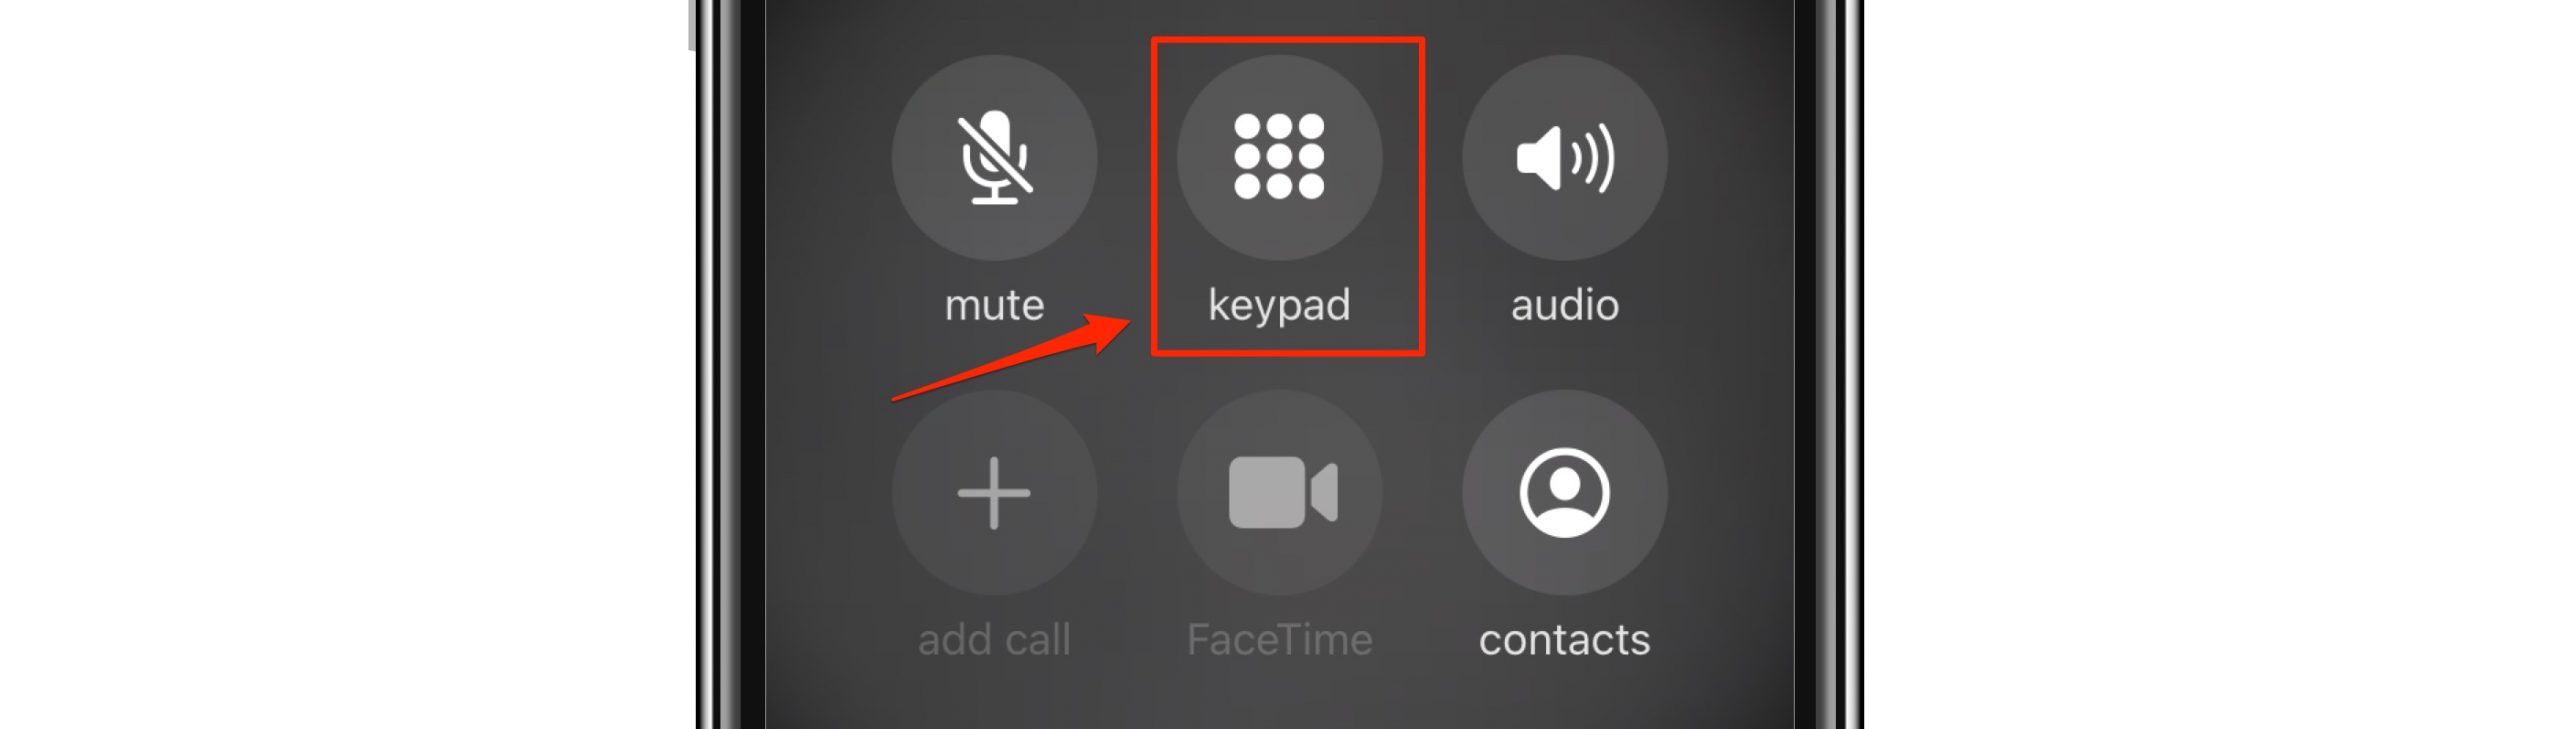 How to Fix iPhone Keypad not Working During Calls • macReports